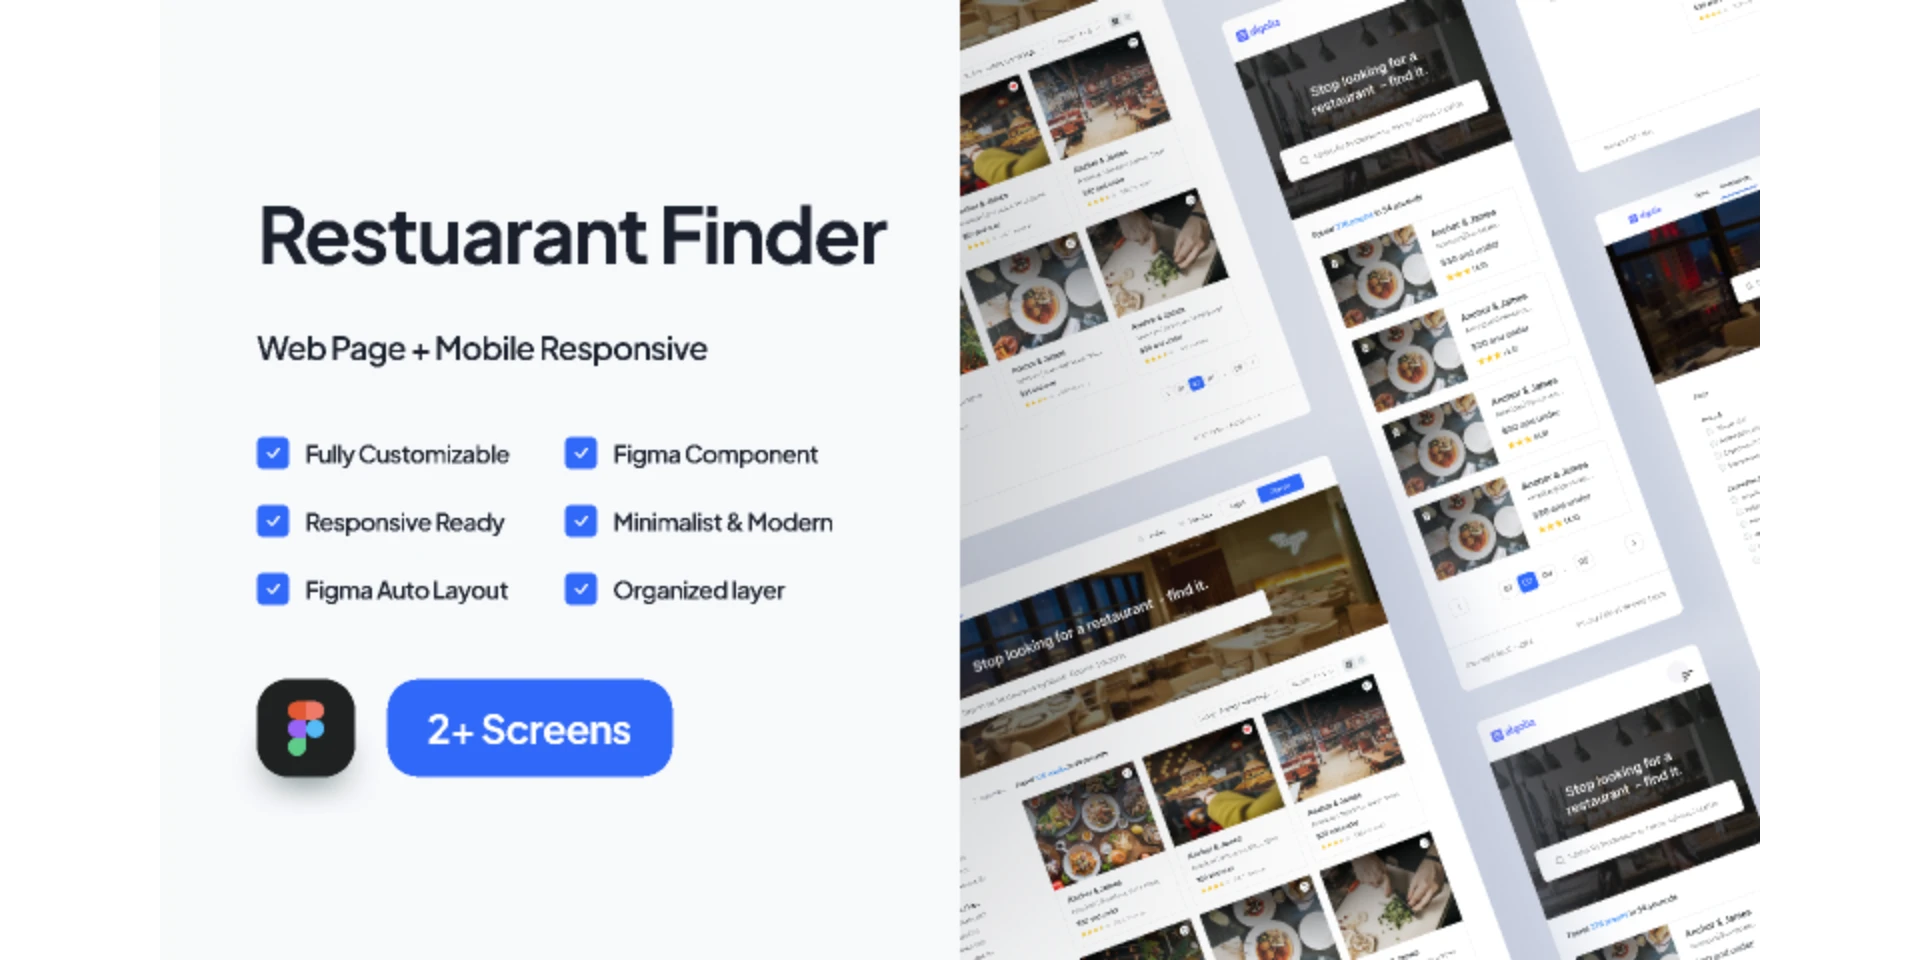 Restaurant Finder Webpage for Figma and Adobe XD